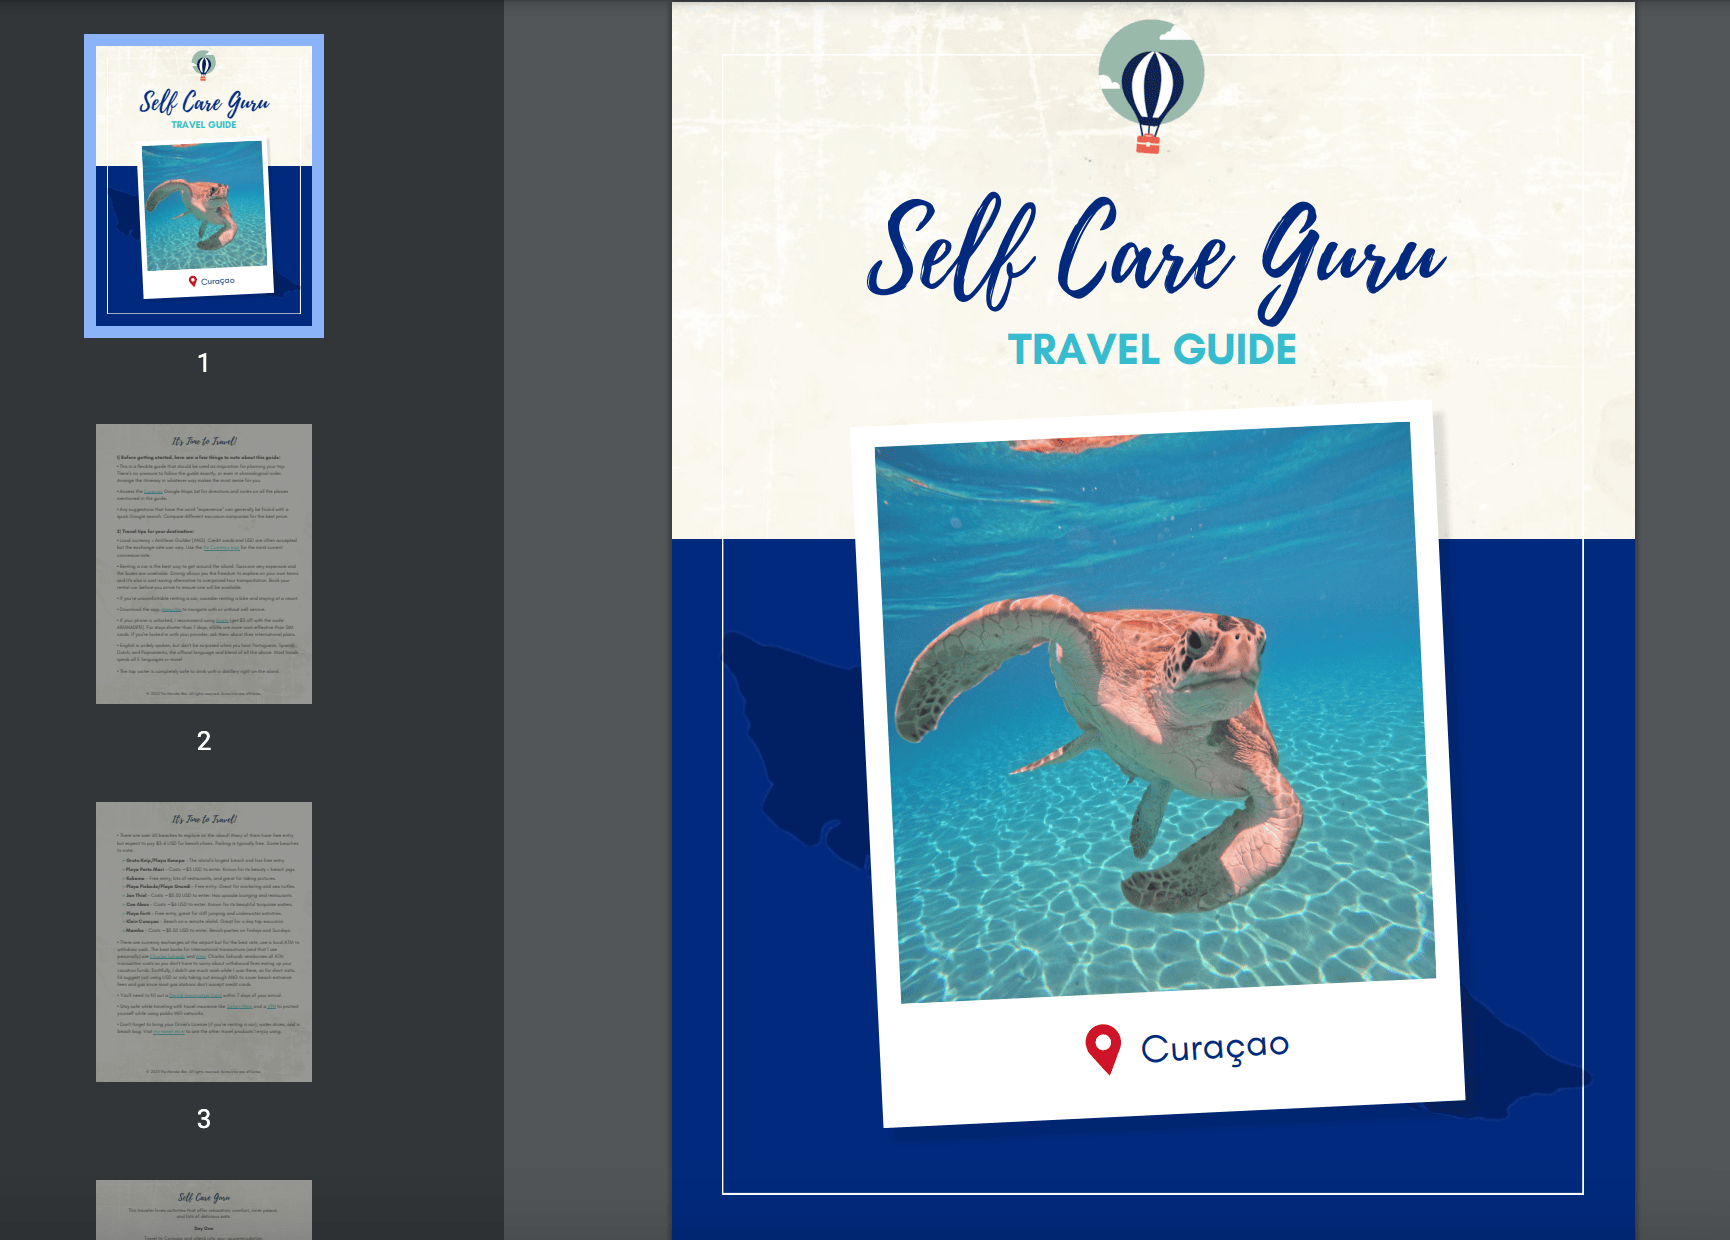 Curaçao Travel Itinerary Planner for Self Care Guru, Overview